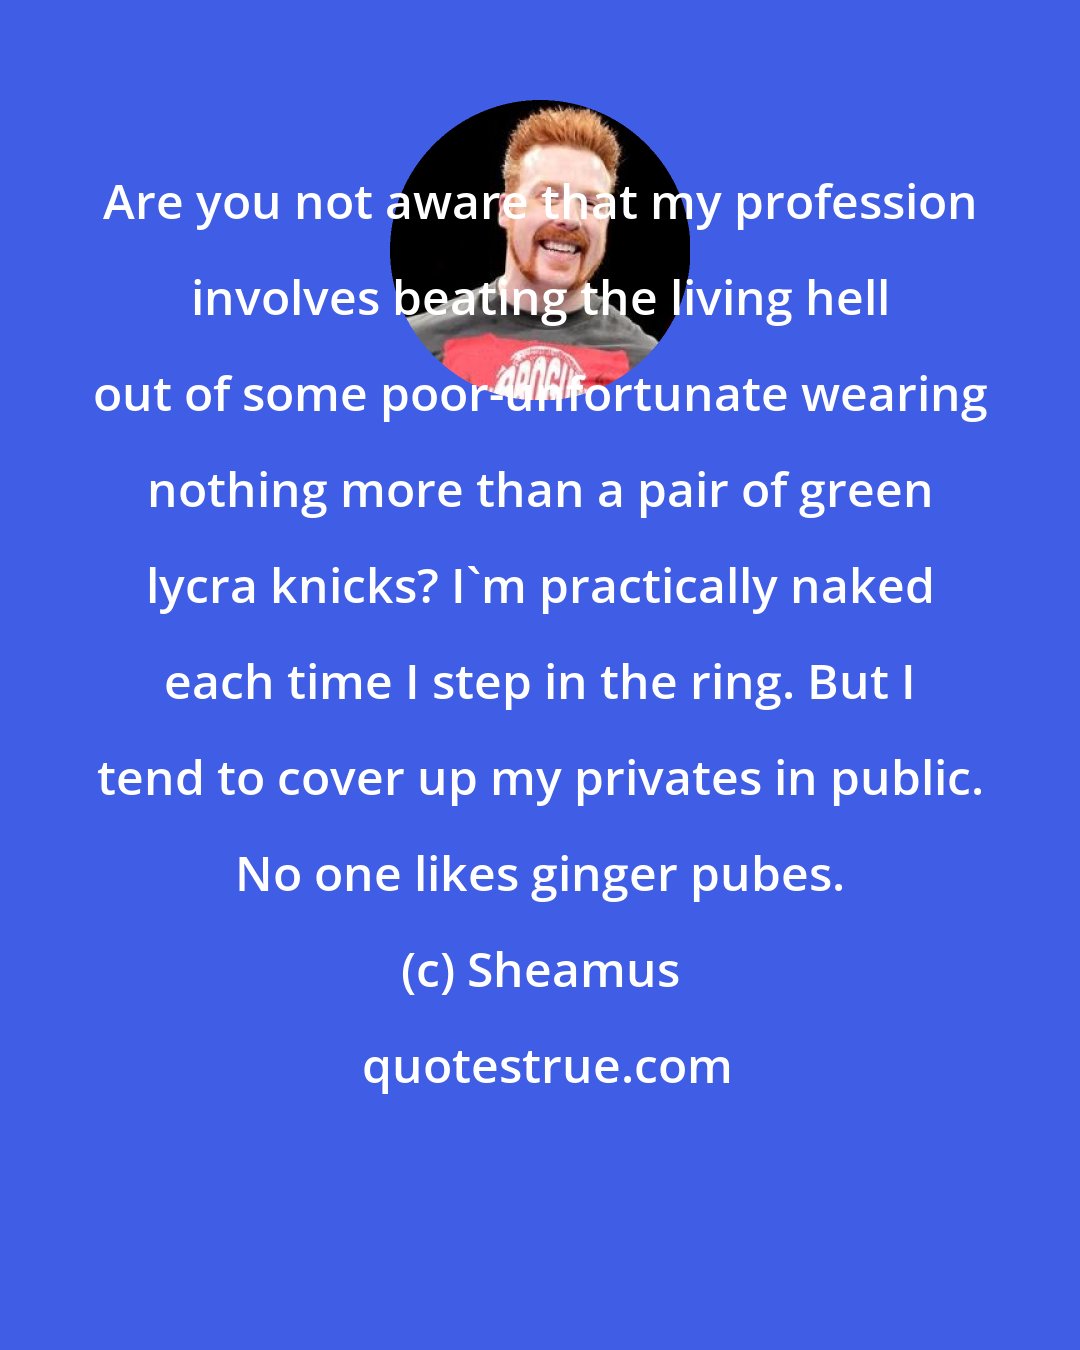 Sheamus: Are you not aware that my profession involves beating the living hell out of some poor-unfortunate wearing nothing more than a pair of green lycra knicks? I'm practically naked each time I step in the ring. But I tend to cover up my privates in public. No one likes ginger pubes.